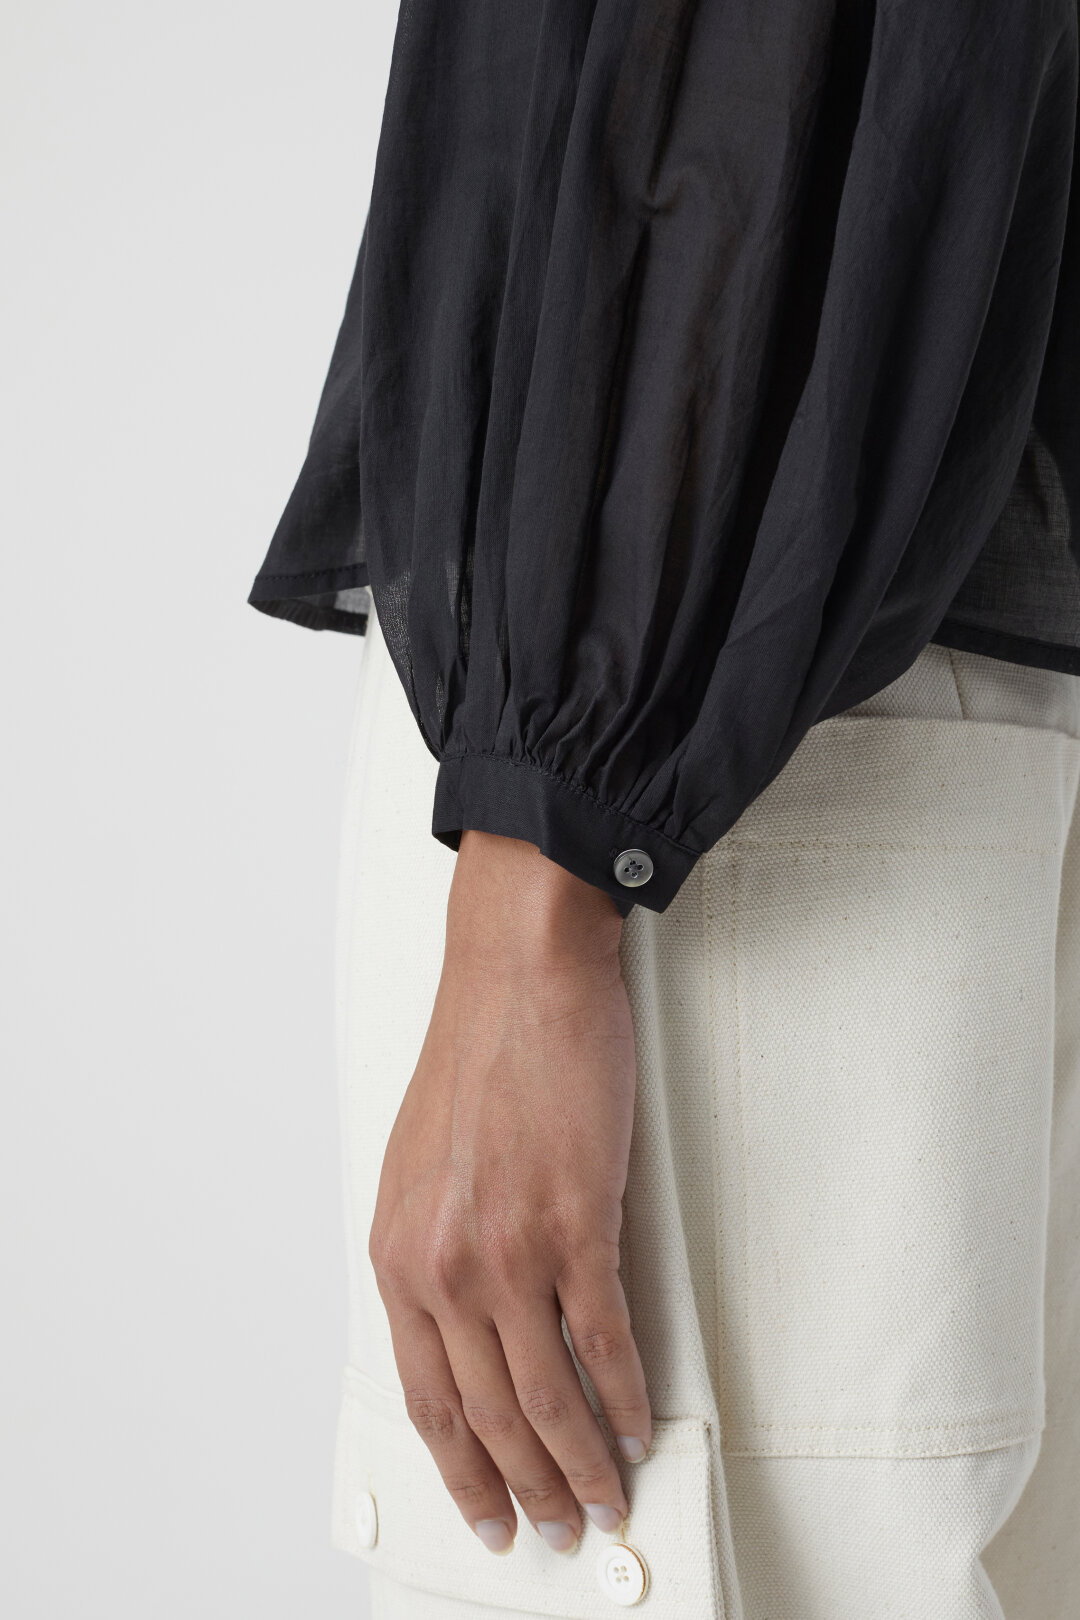 CLOSED Gathered Shirt in Black